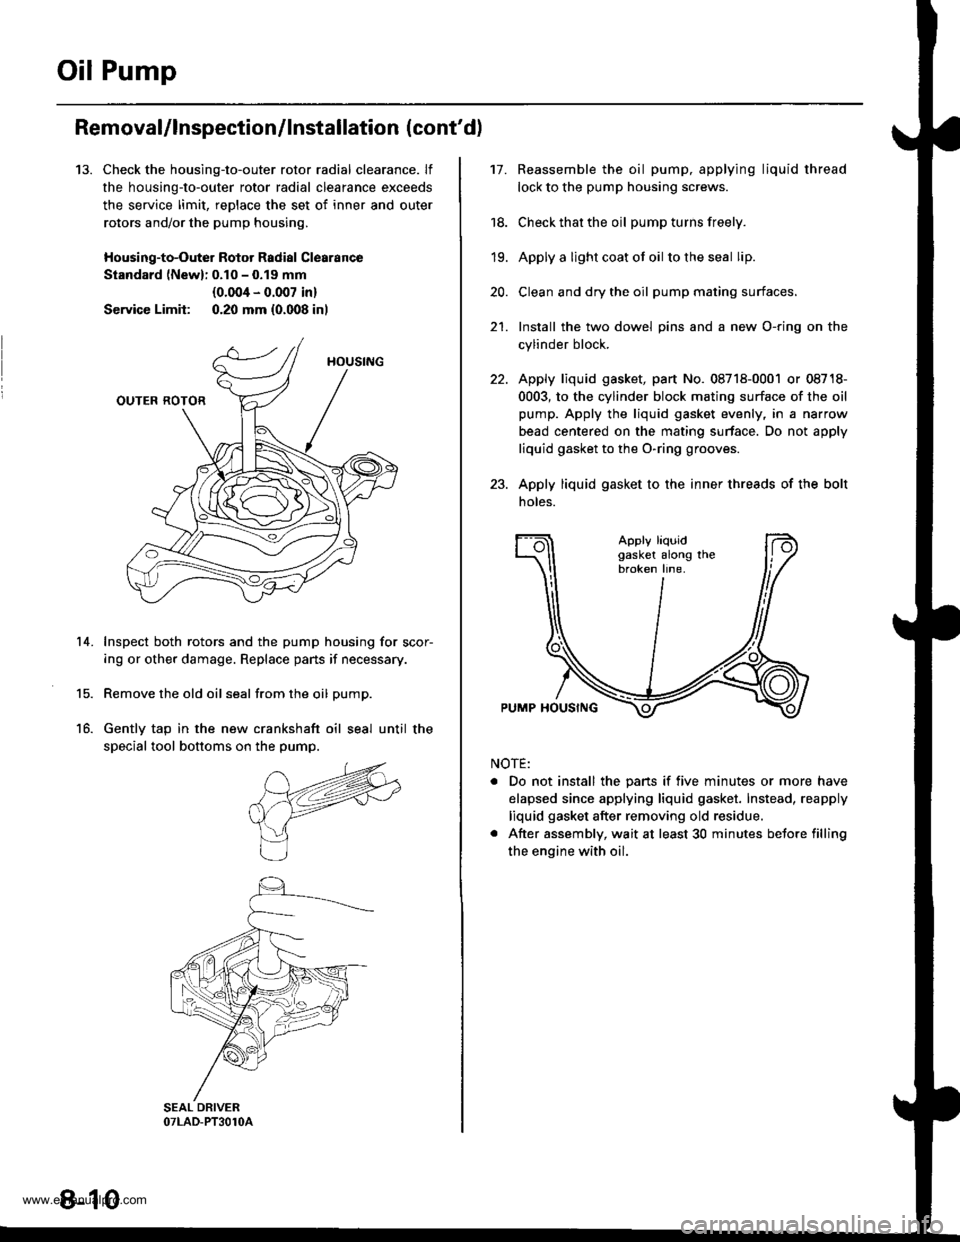 HONDA CR-V 2000 RD1-RD3 / 1.G Owners Guide 
Oil Pump
13.
Removal/lnspection/lnstallation (contd)
Check the housing-to-outer rotor radial clearance. lf
the housing-to-outer rotor radial clearance exceeds
the service limit, reDlace the set of i